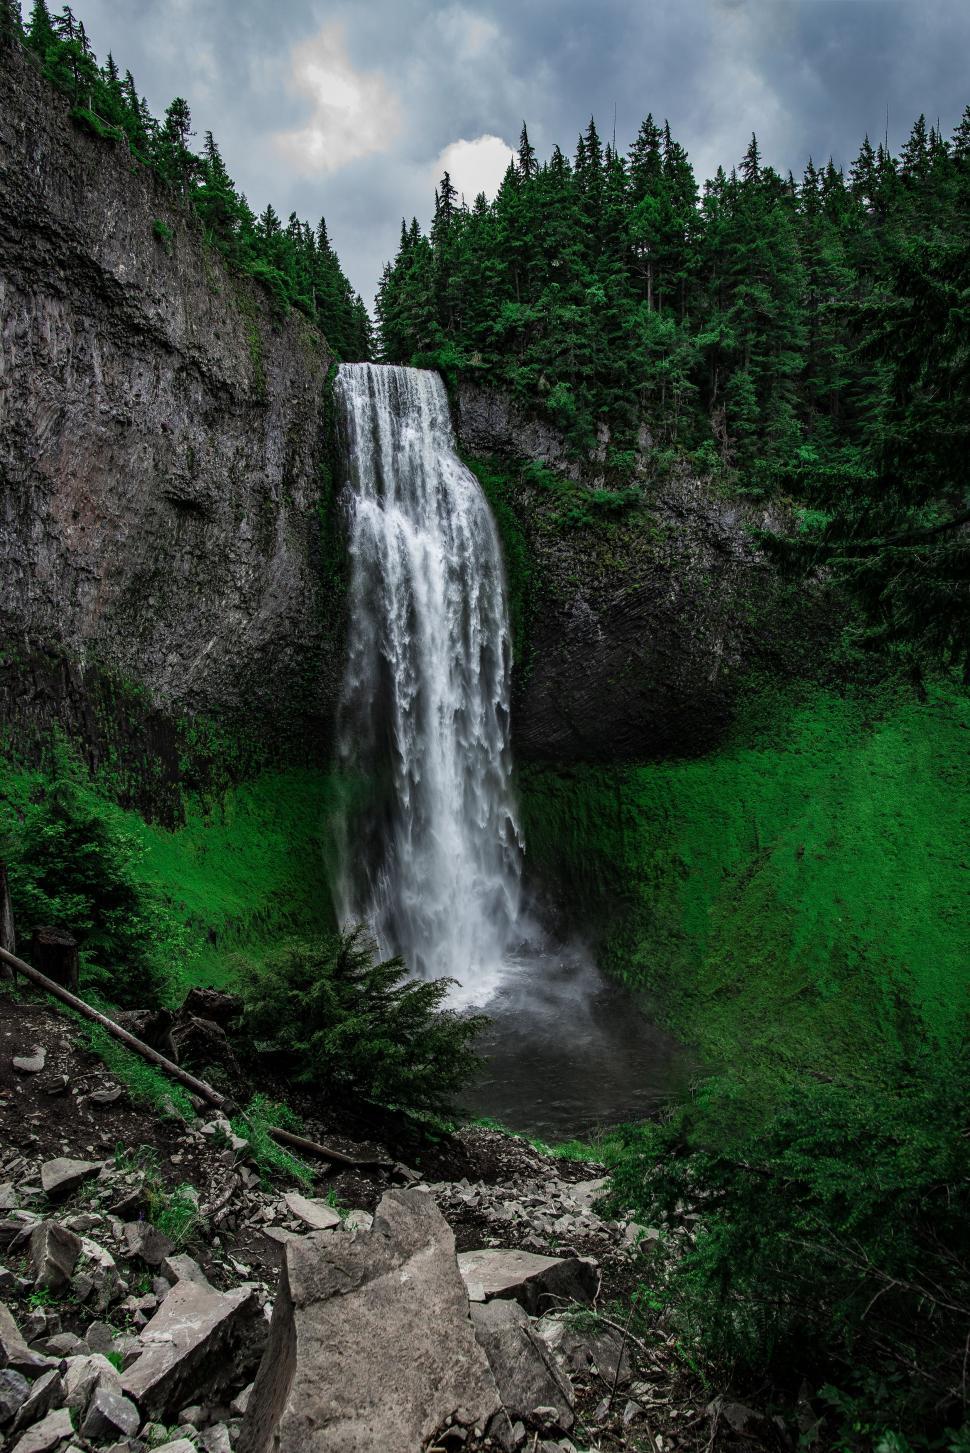 Free Image of Majestic Waterfall in Lush Forest 